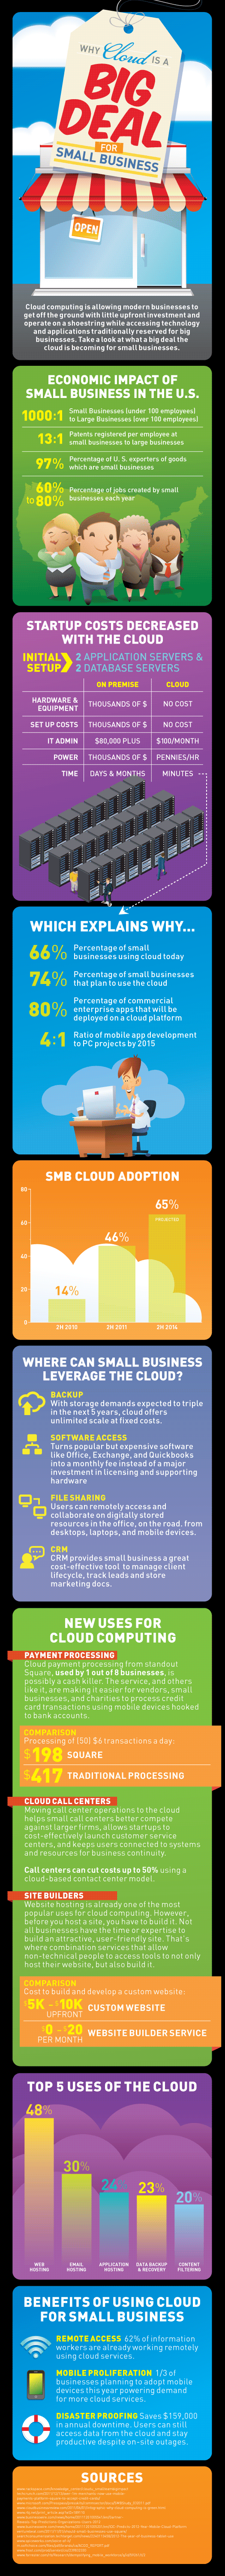 cloud-computing-for-small-business